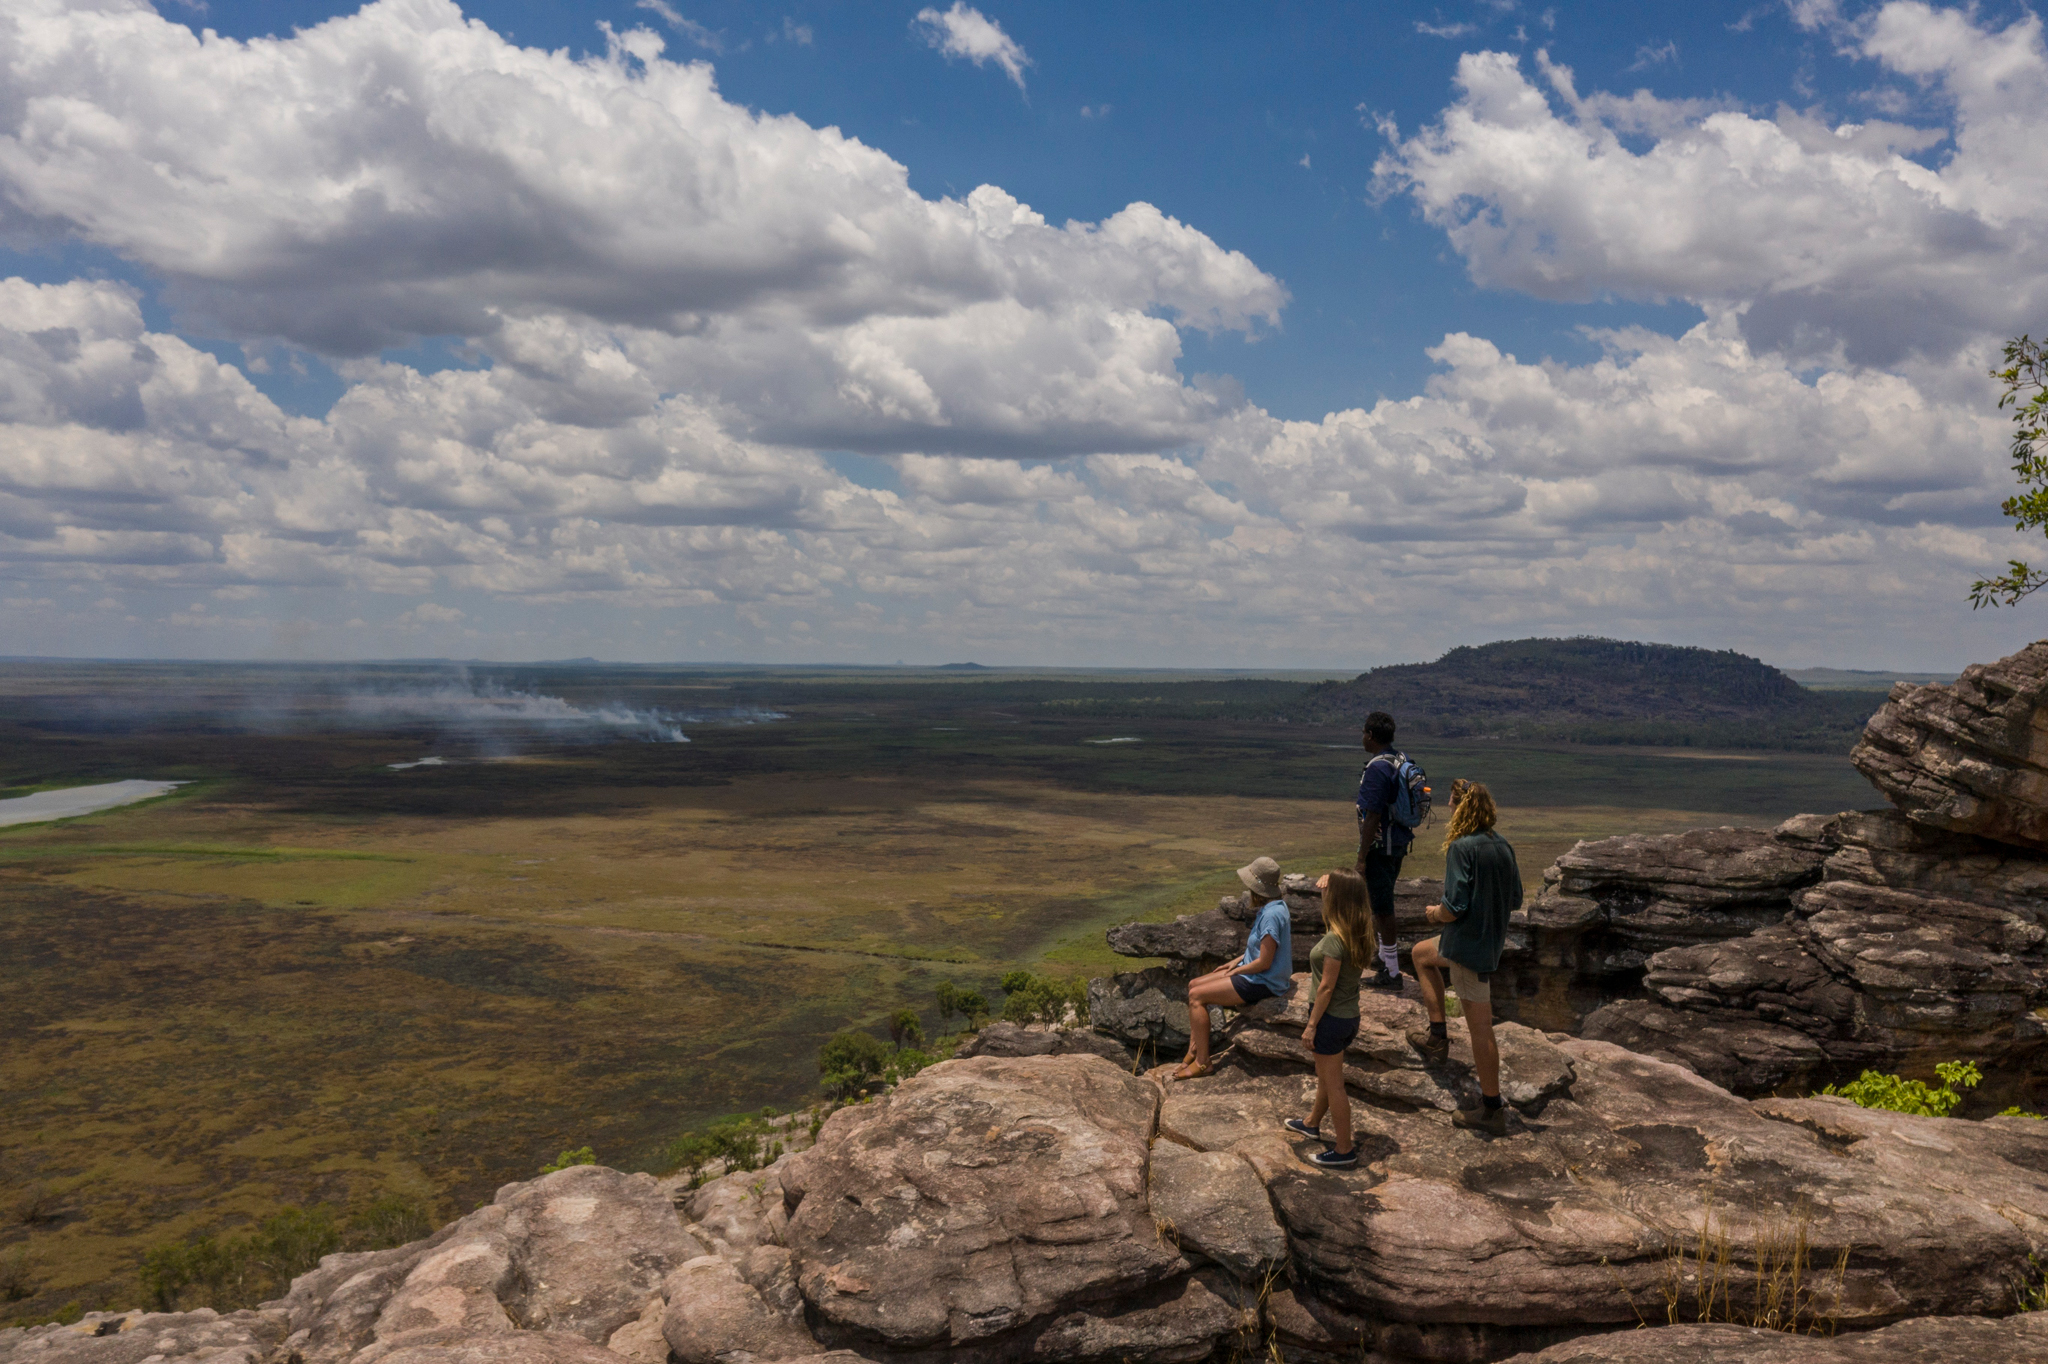 A Venture North Safaris tour guide and group looking out into the distance on an adventure tour, NT © Tourism Australia 